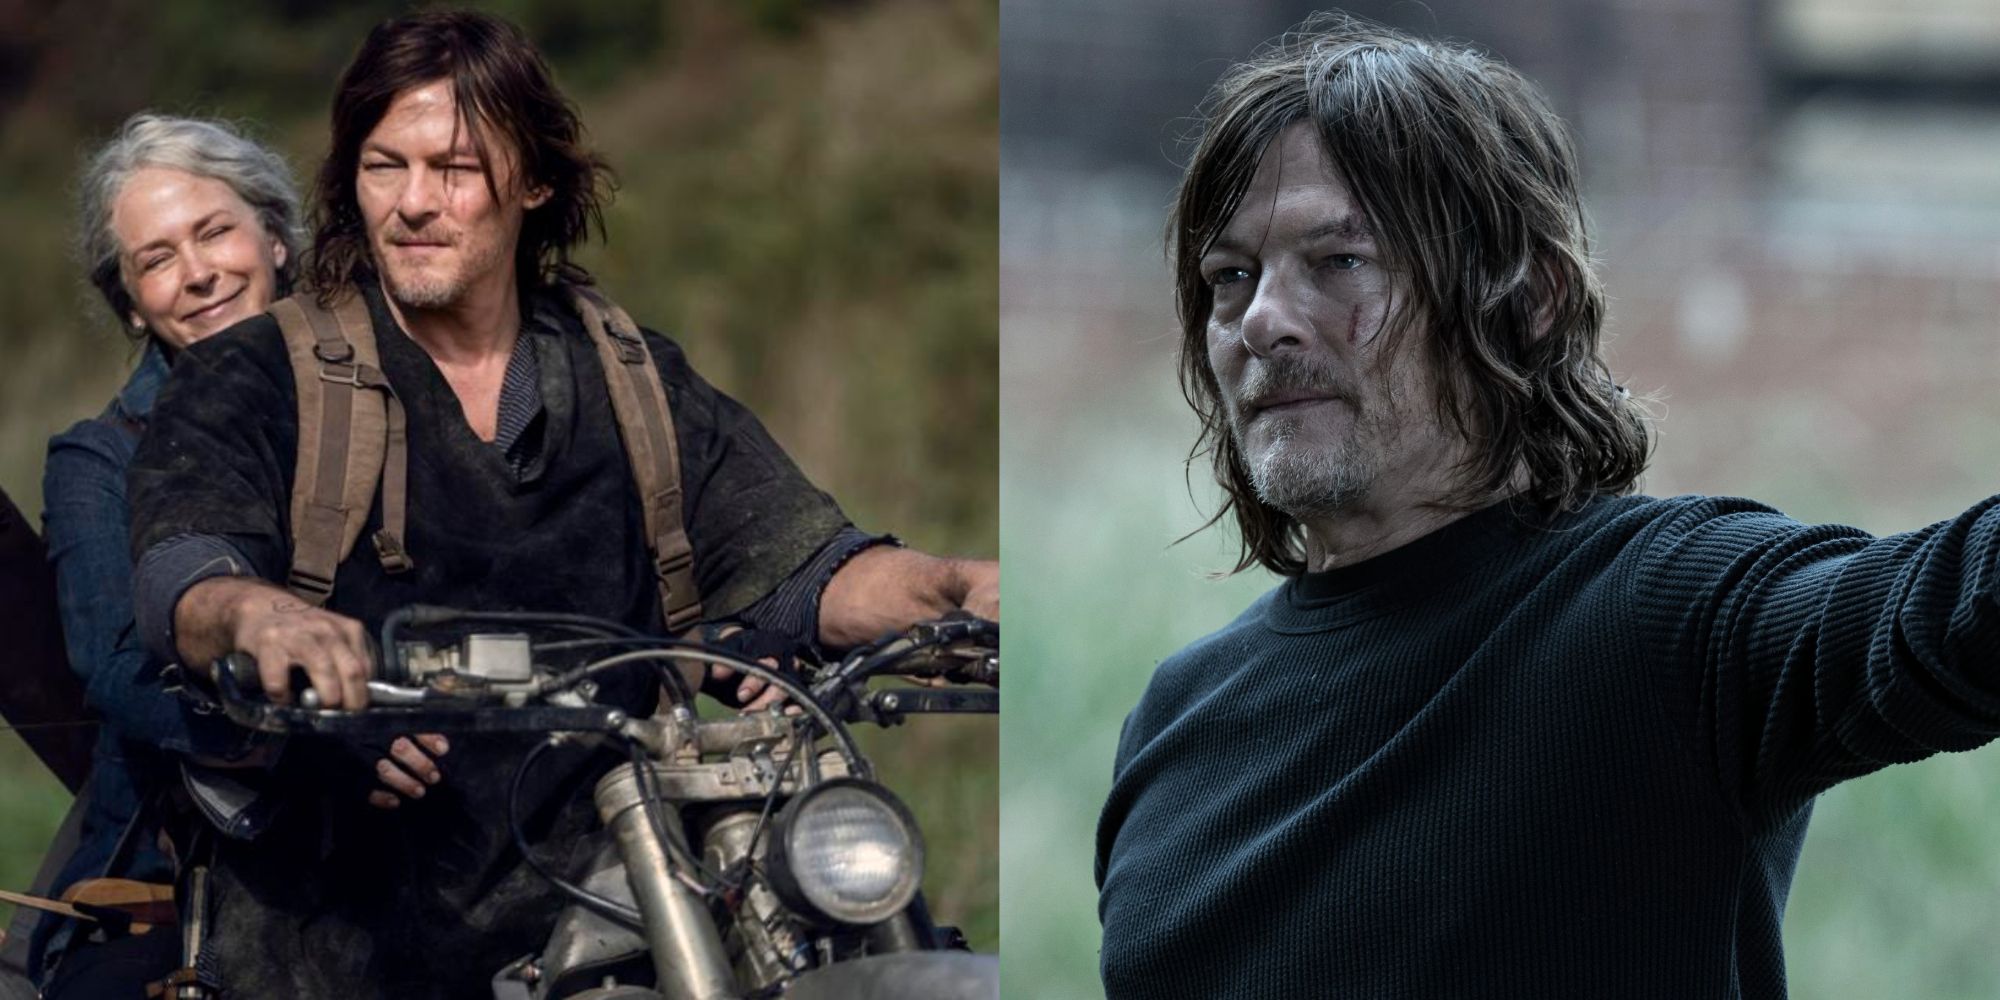 Split images of Daryl and Carol on a bike and Daryl by a tree in The Walking Dead